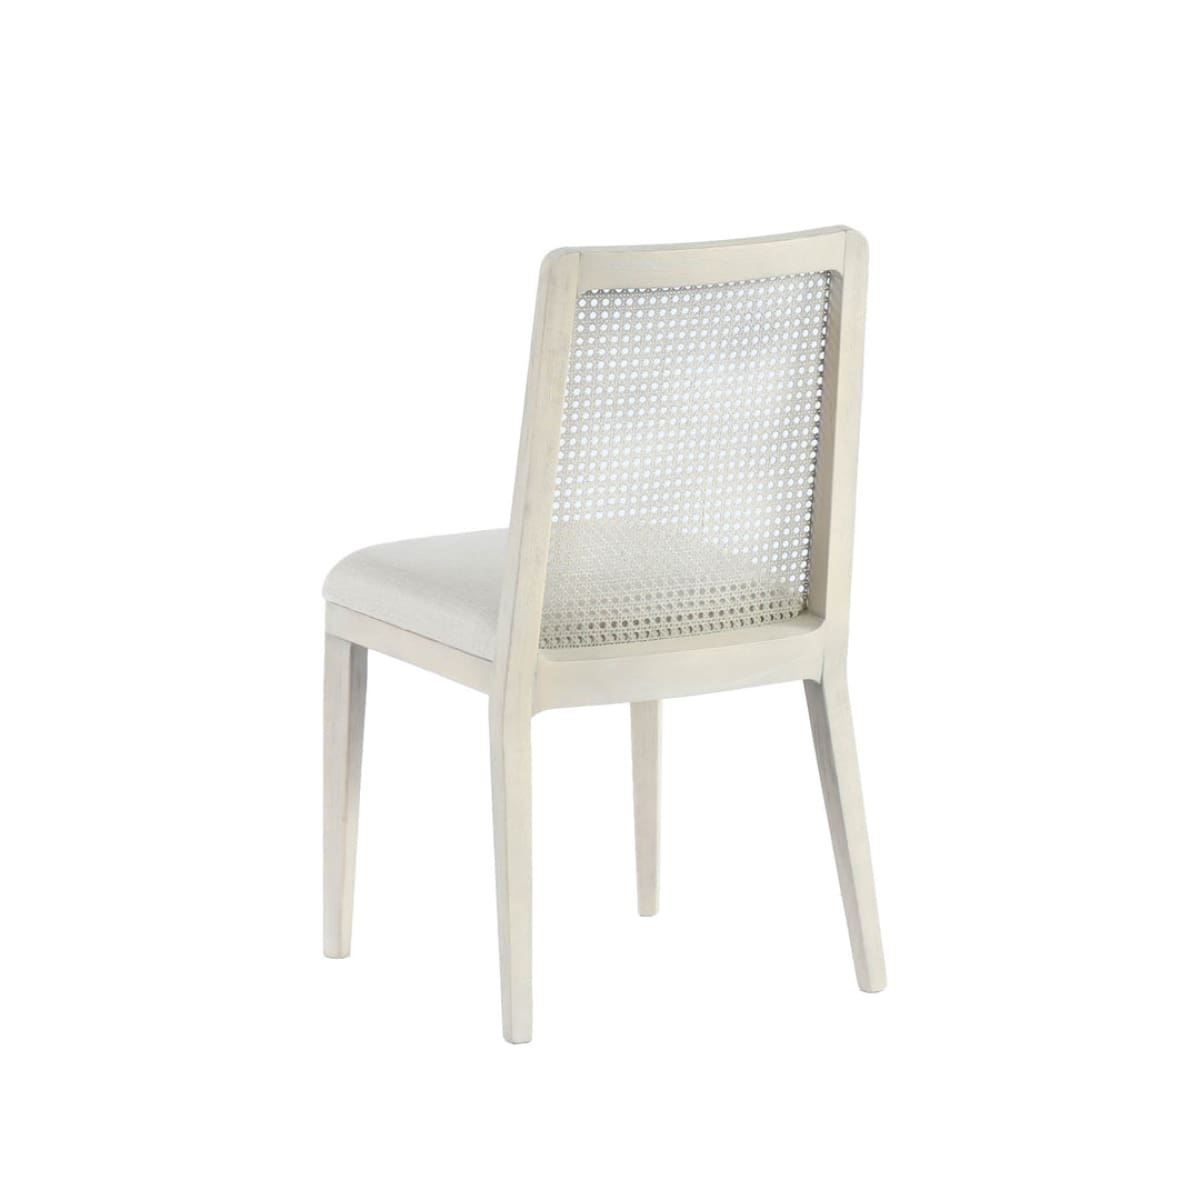 Cane Dining Chair - Beige/White Wash Frame - lh-import-dining-chairs